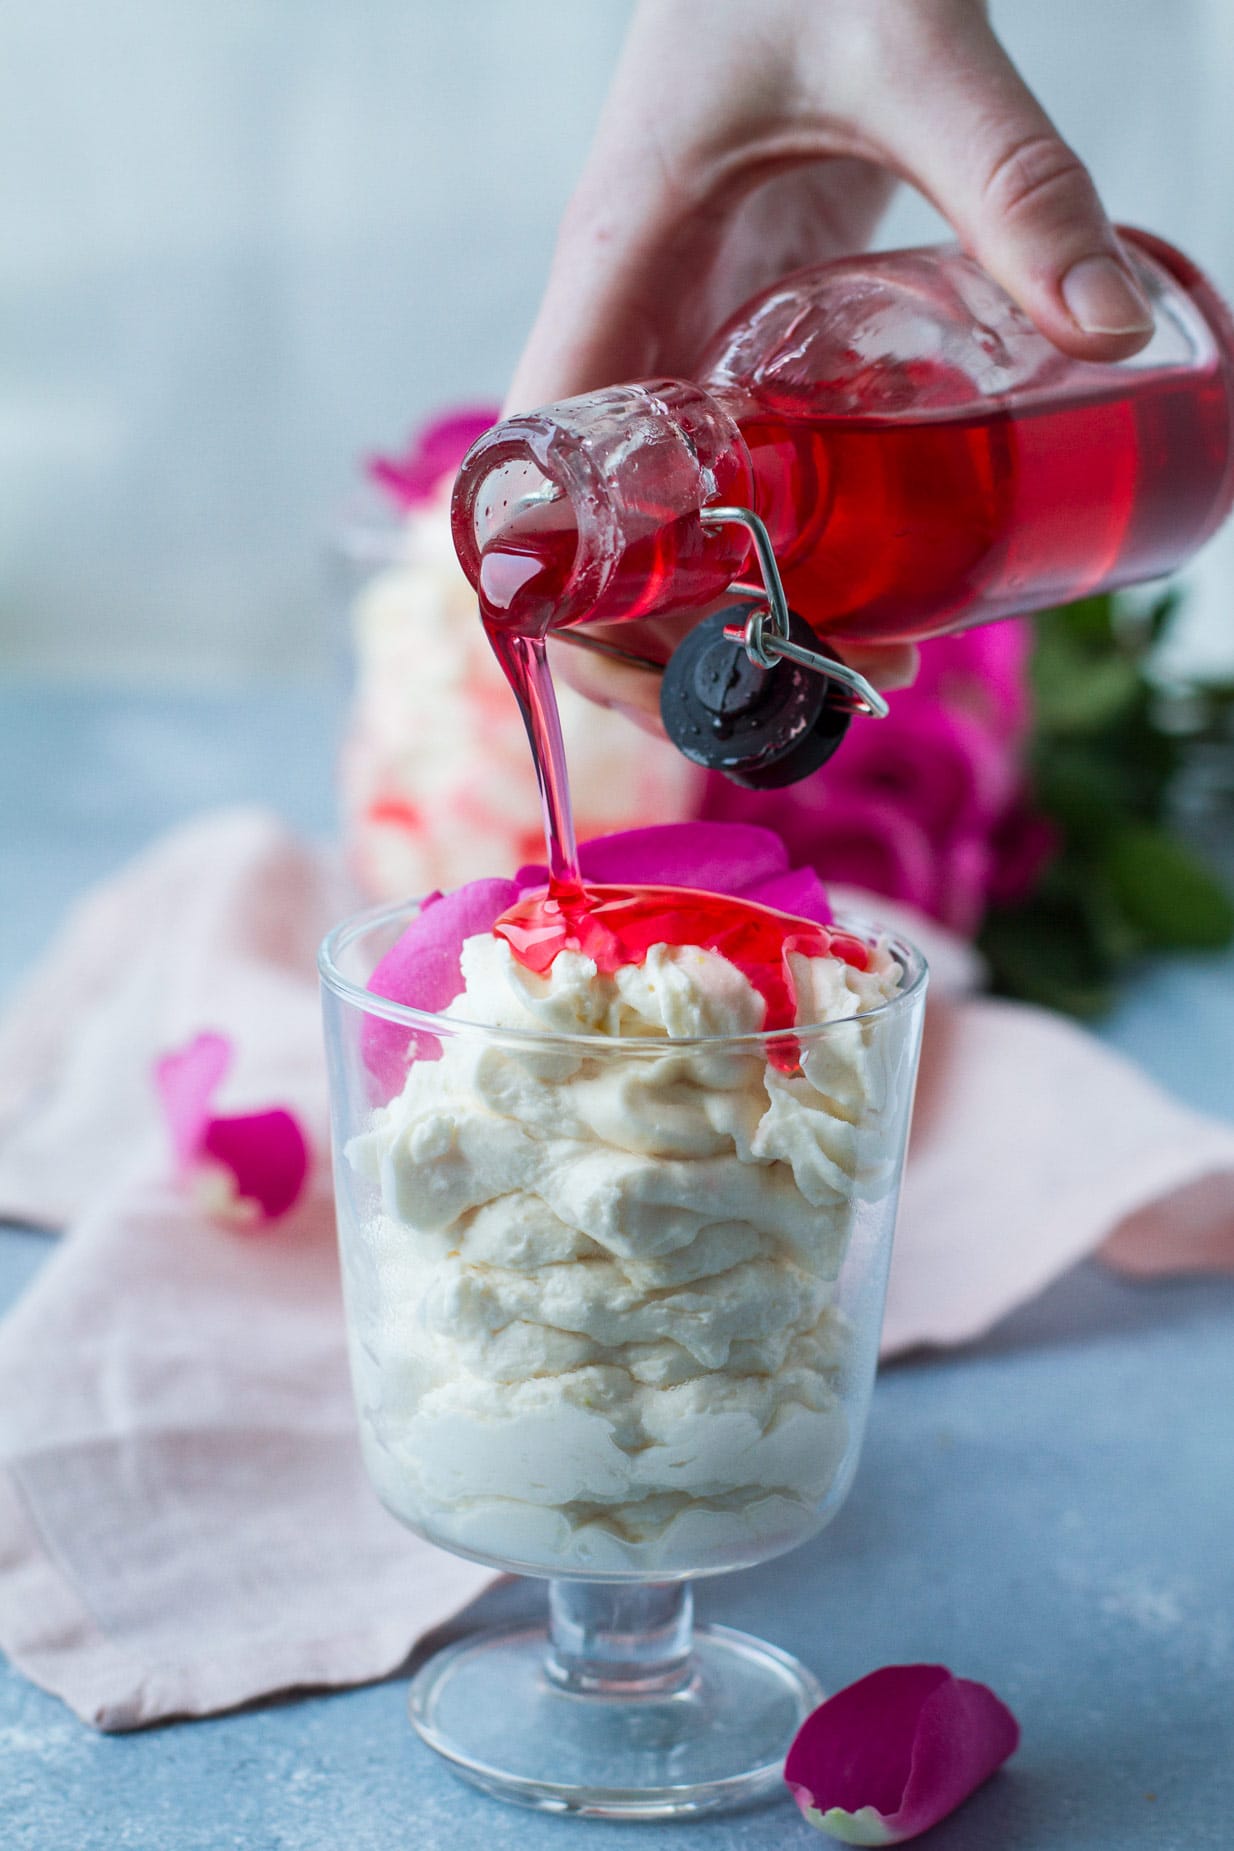 A glass with white mousse and a glass of red rose syrup pouring over the white mousse. Blue table and pink cloth, blurred pink roses in the background. 